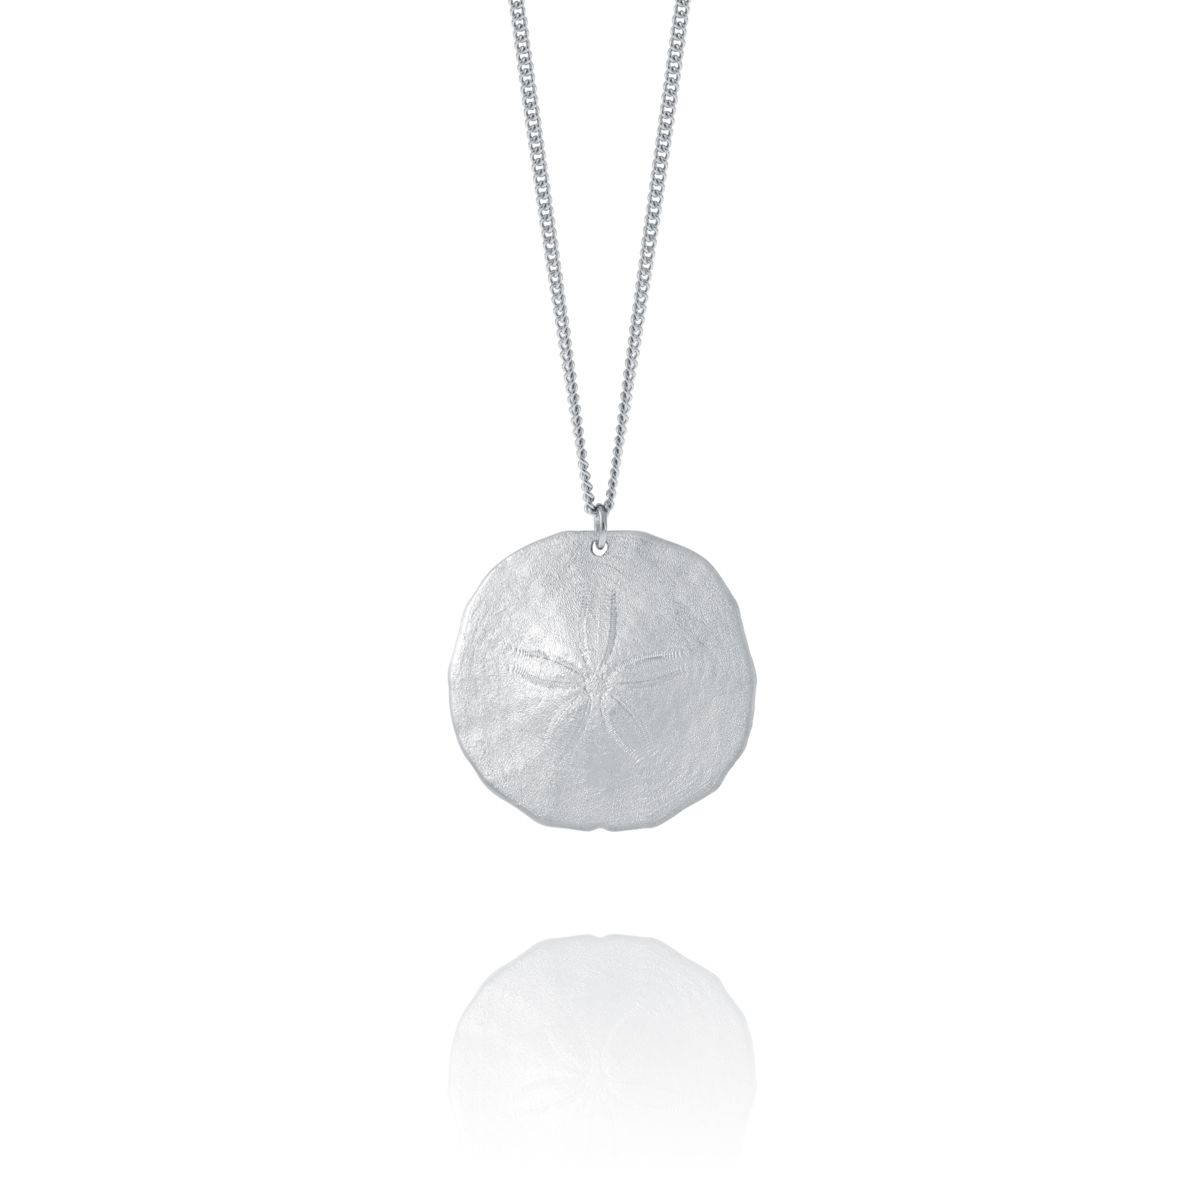 Kovel Sealife Sterling Silver and 18k Gold Plate Sand Dollar Pendant with  Mother of Pearl 49134 - Emerald Lady Jewelry